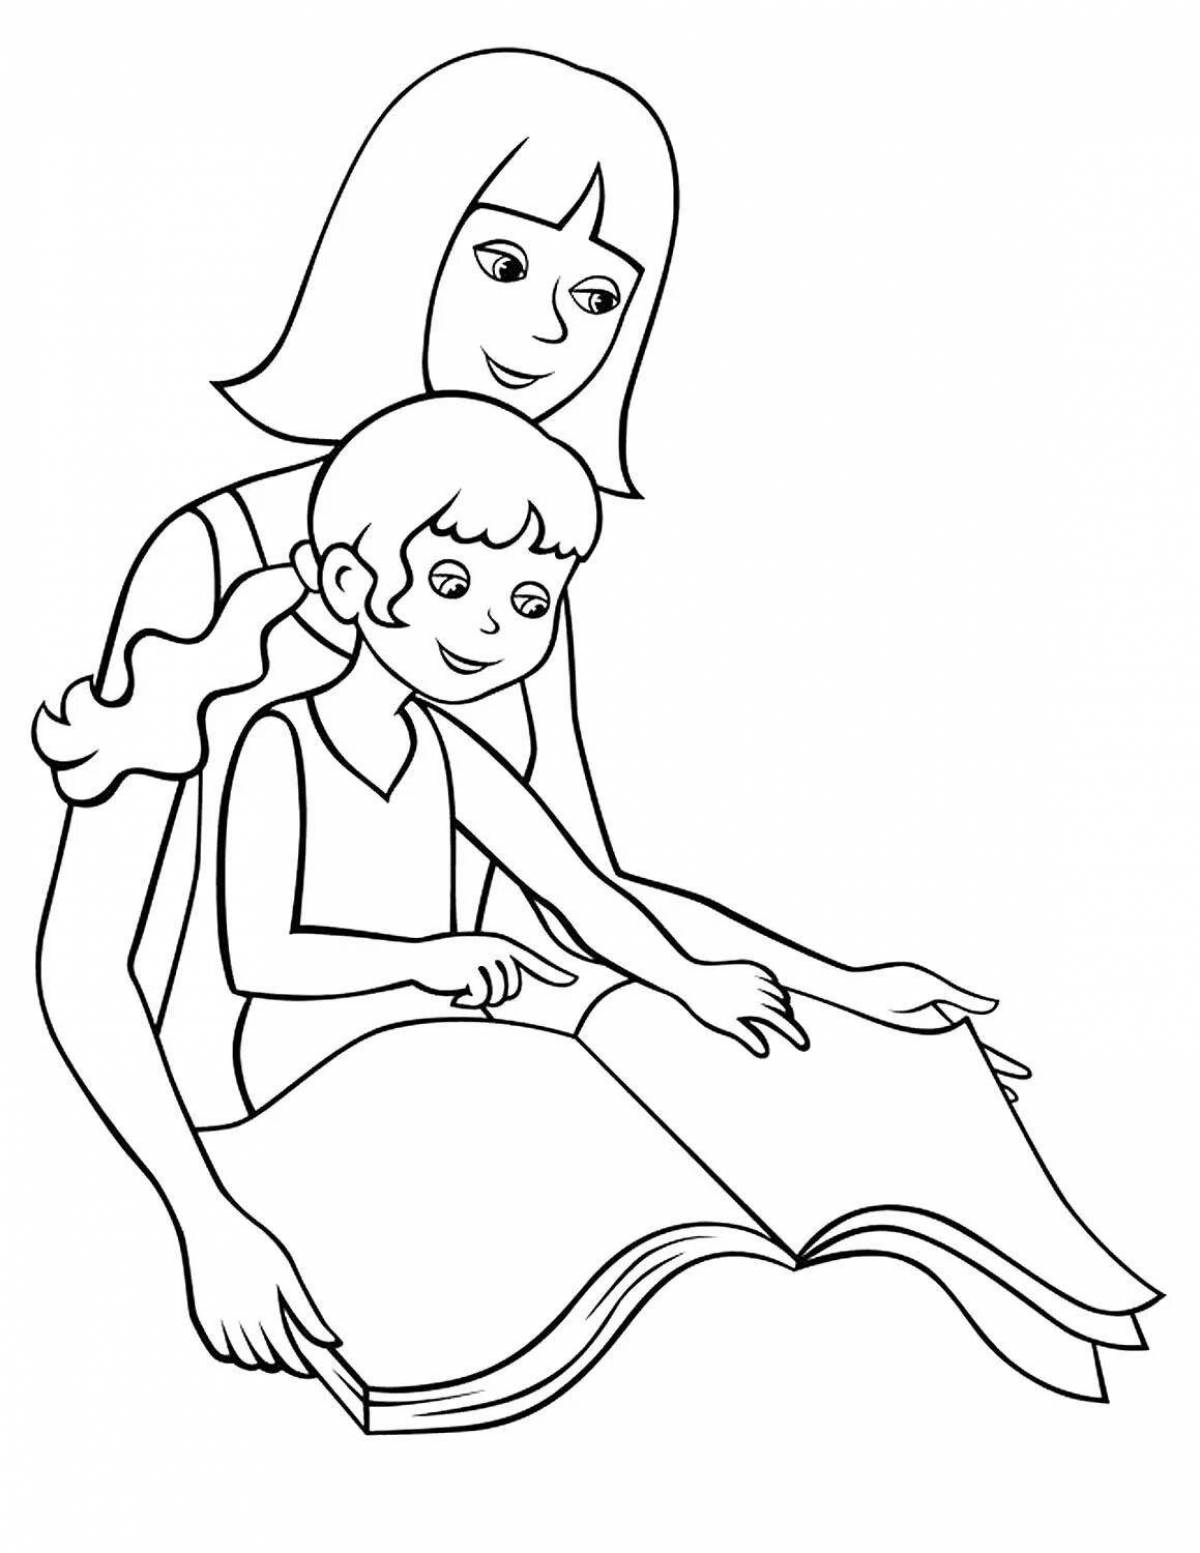 Sky coloring page mom photo